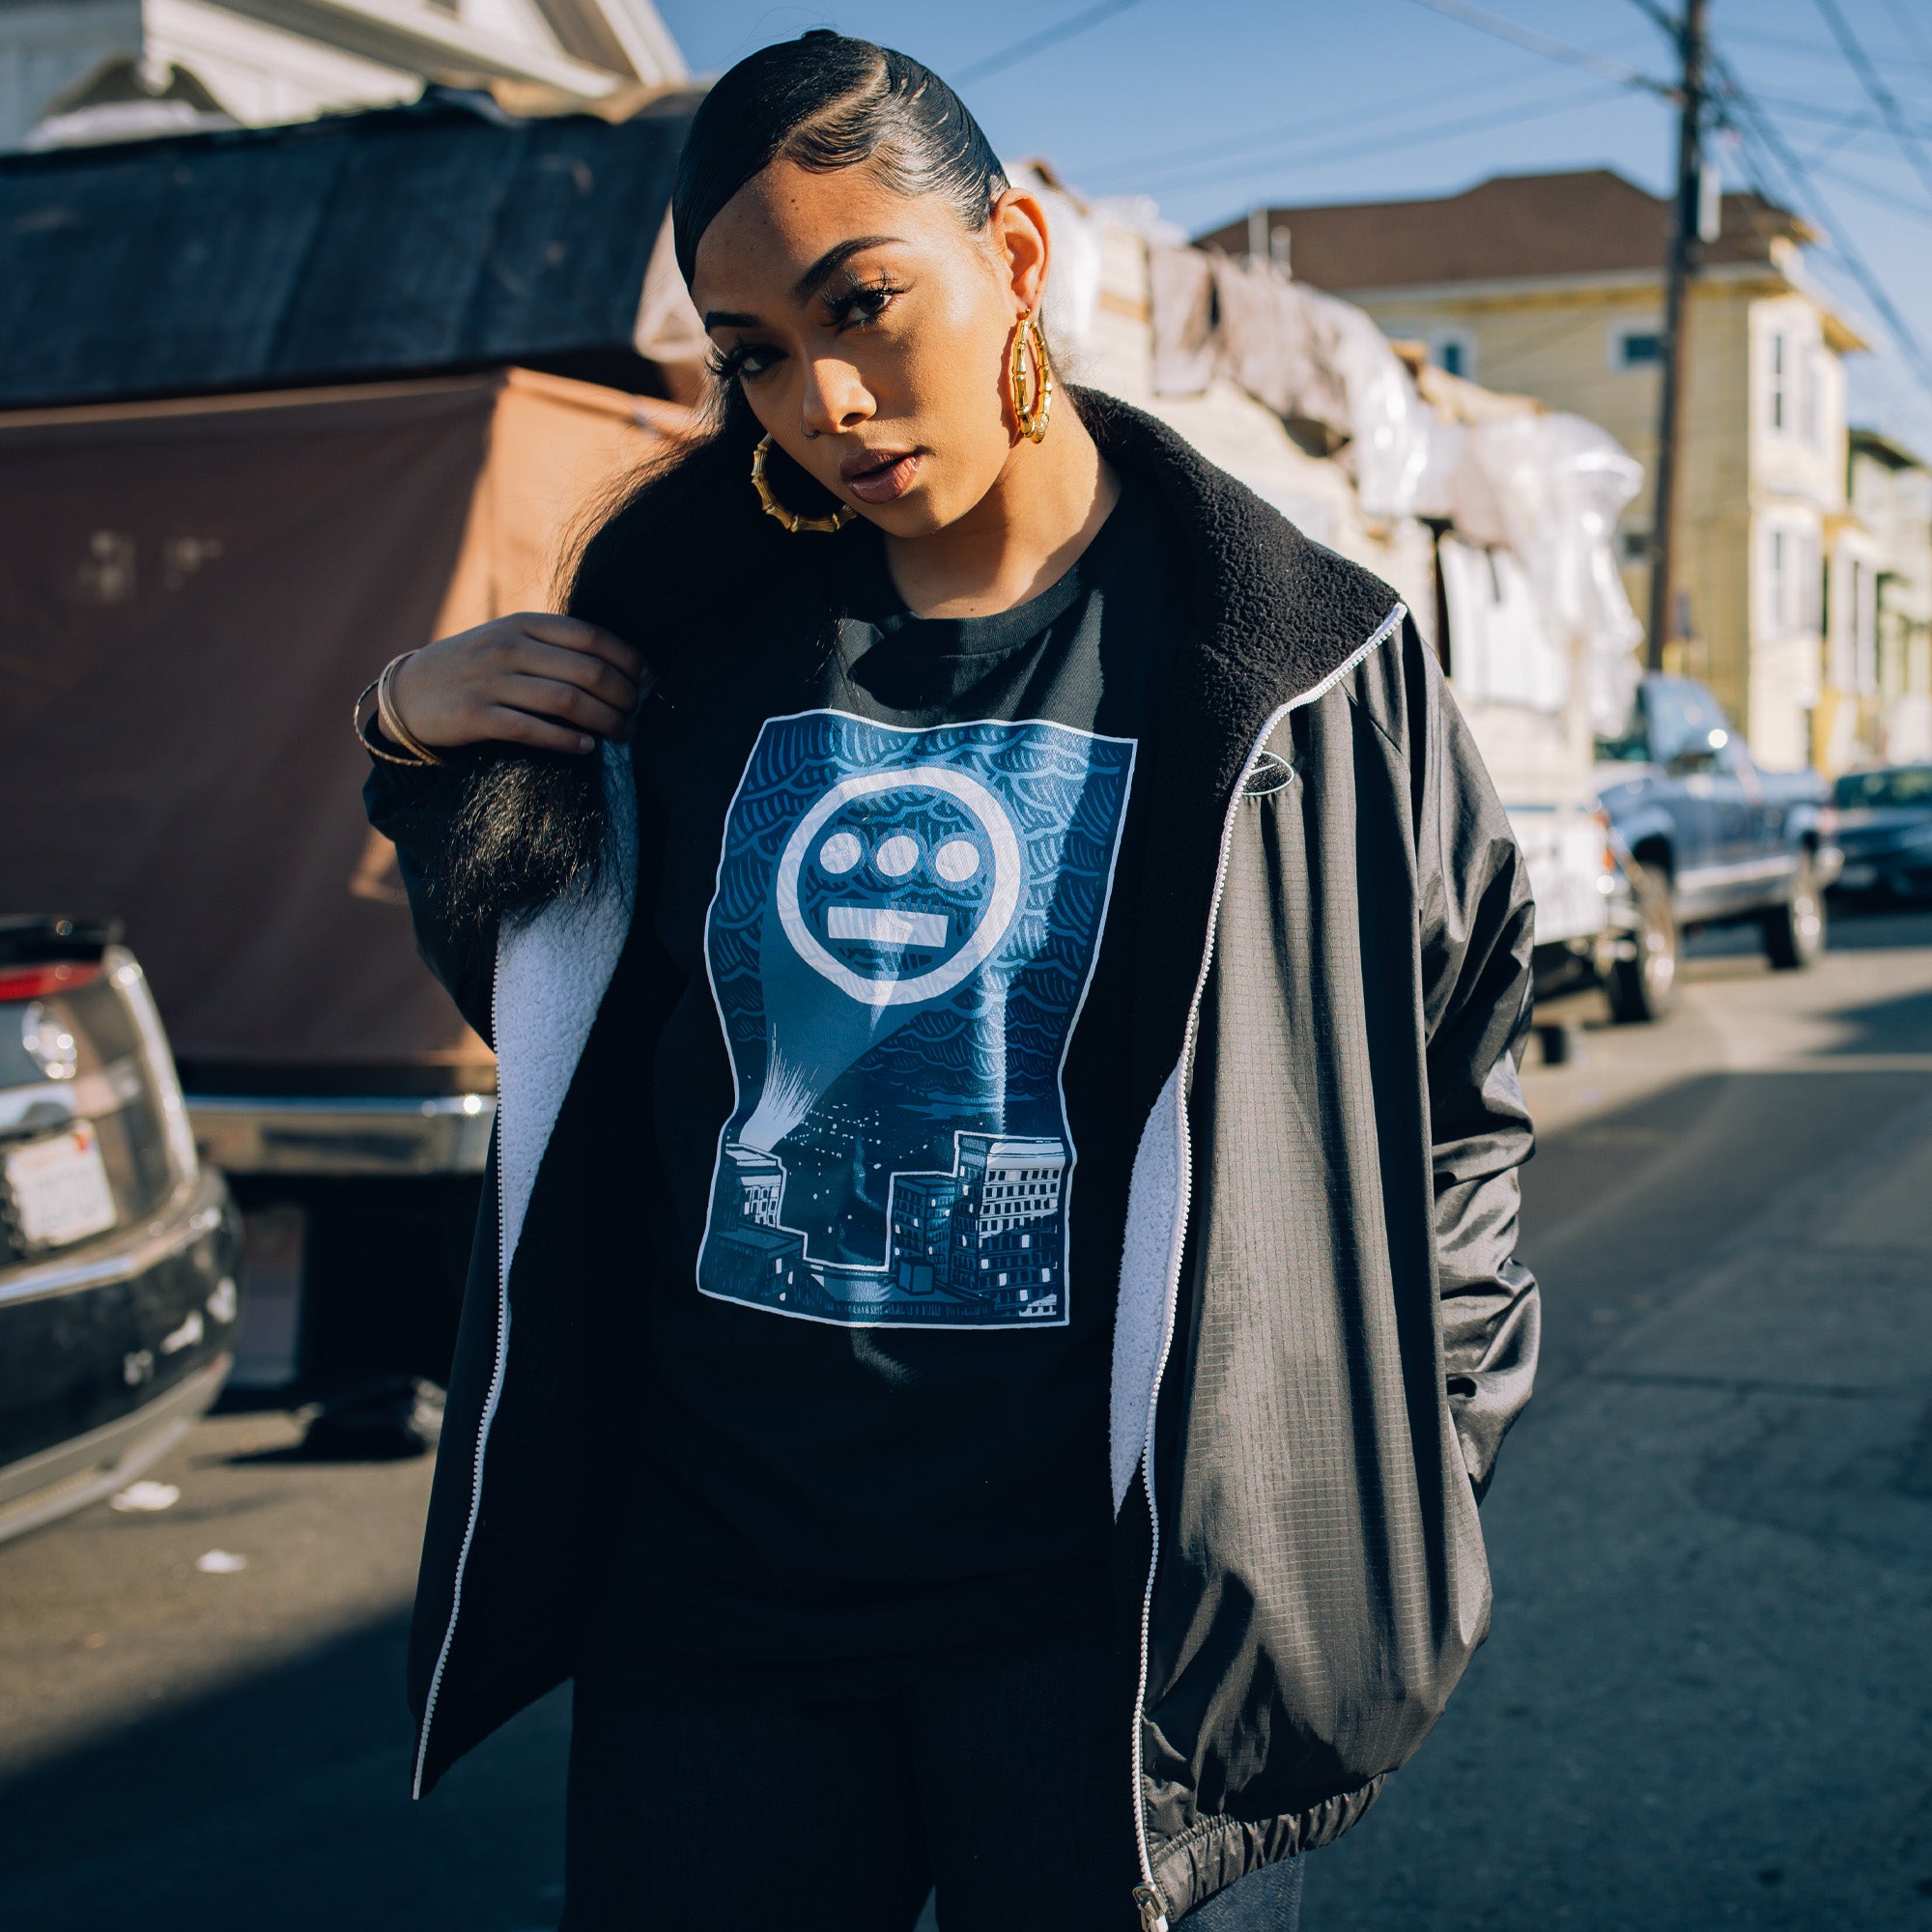 Female model wearing navy t-shirt with a graphic of Hiero logo spotlight signal in Oakland’s night sky above buildings.